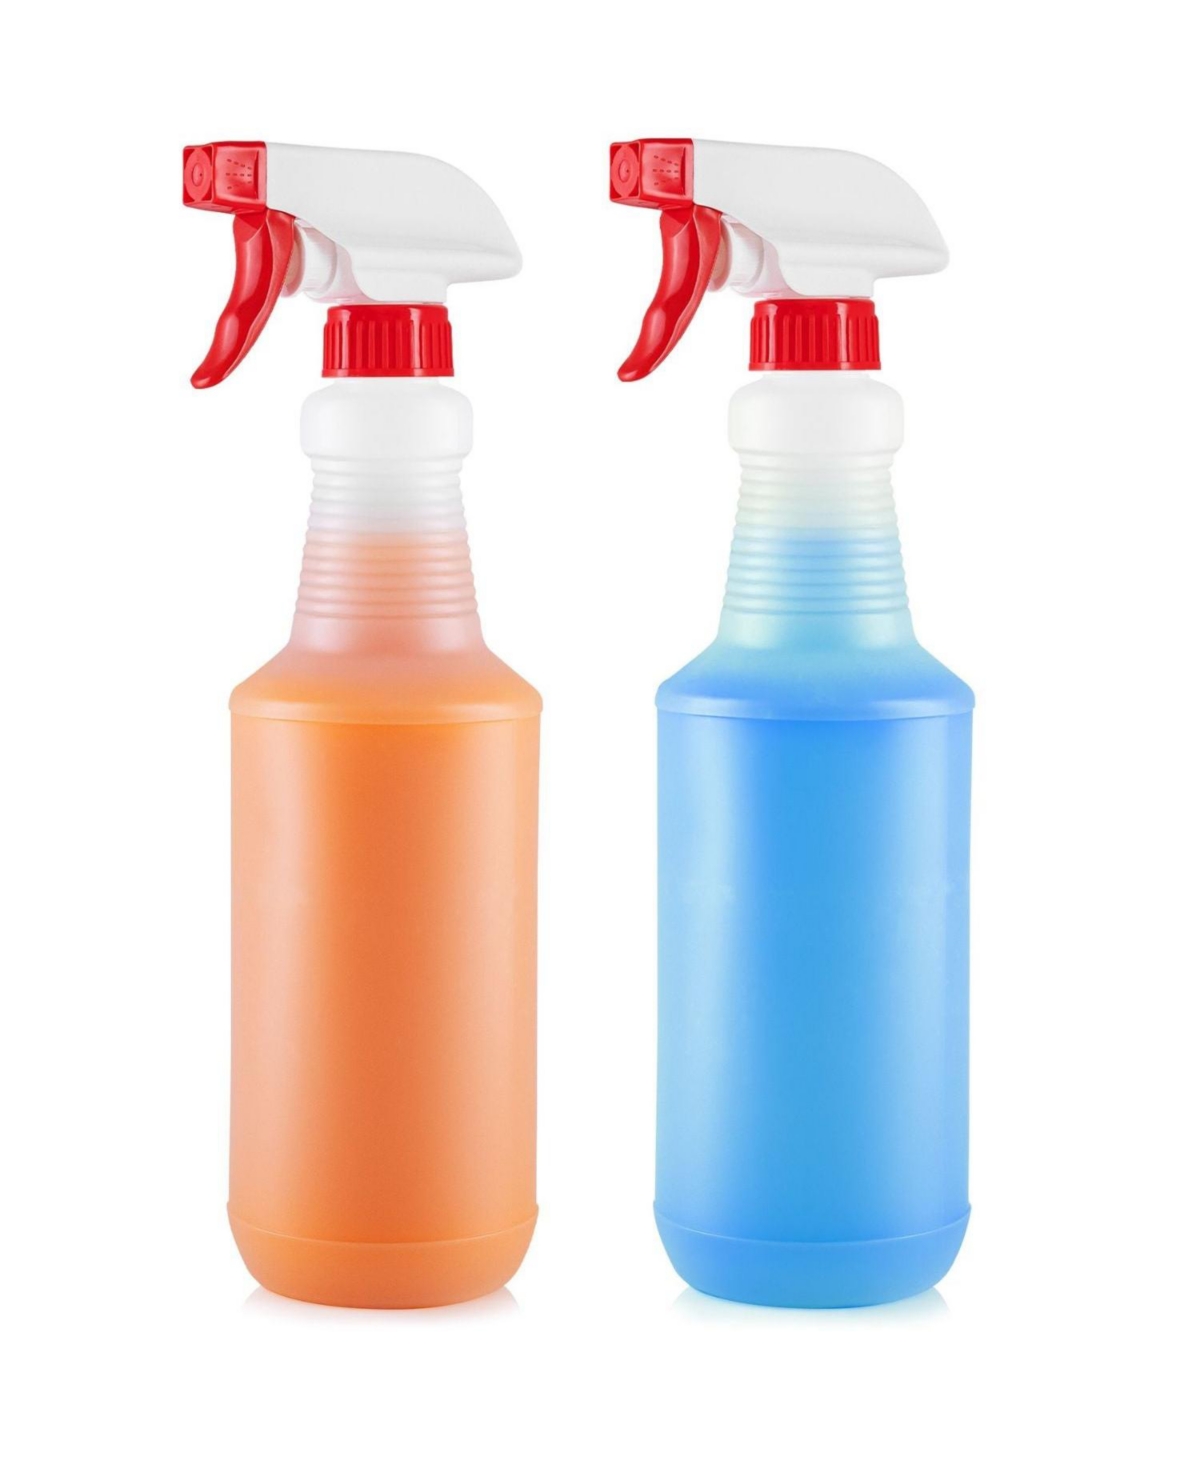 Leakproof Cleaning Spray Bottle Set (2 Pack 16oz) - Red